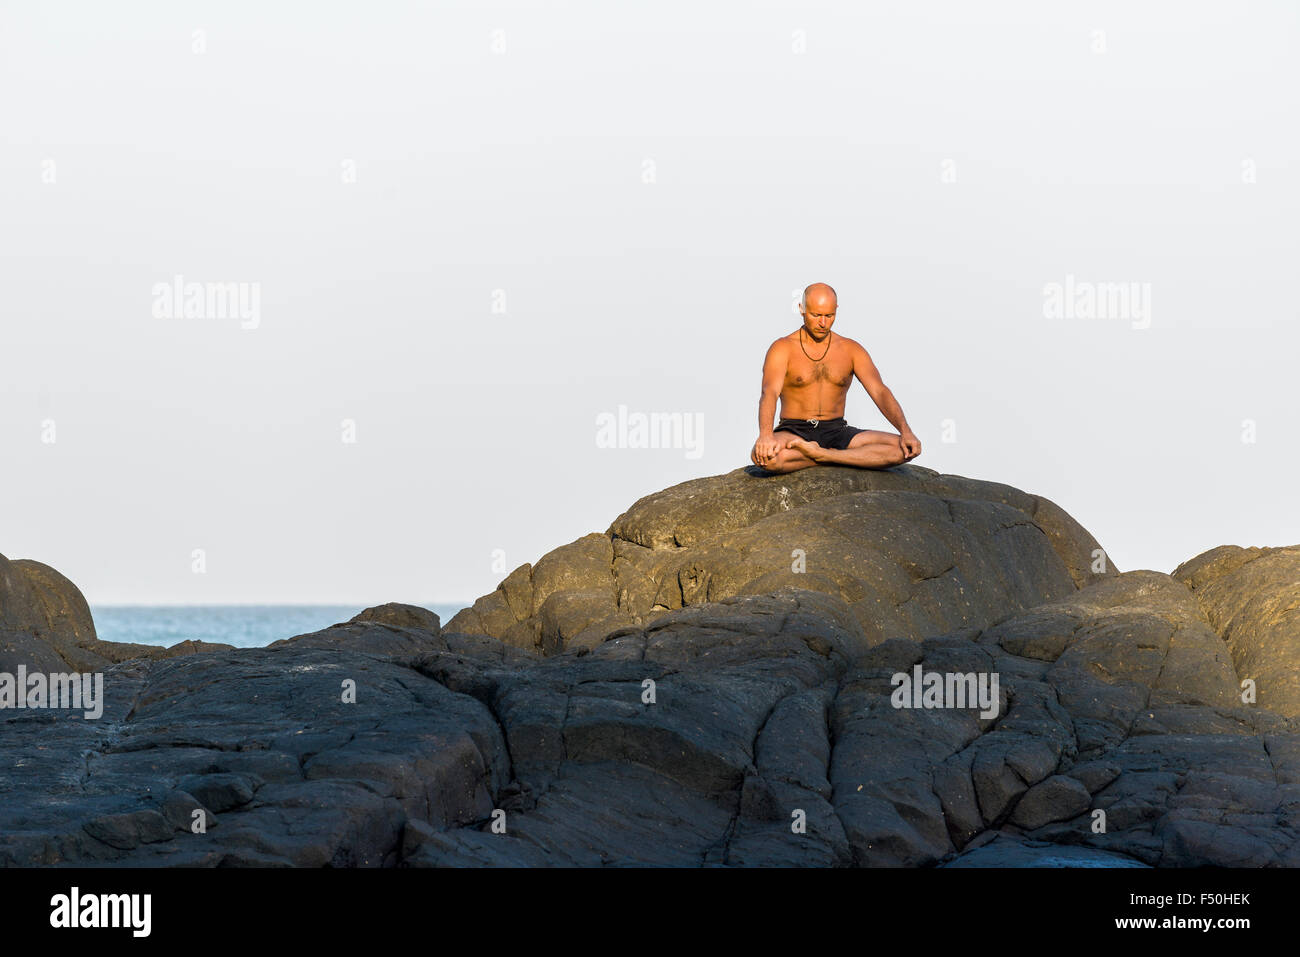 A man is meditating, practicing yoga on a rock at Kudle Beach, one of the famous beaches next to the temple town and pilgrimage Stock Photo